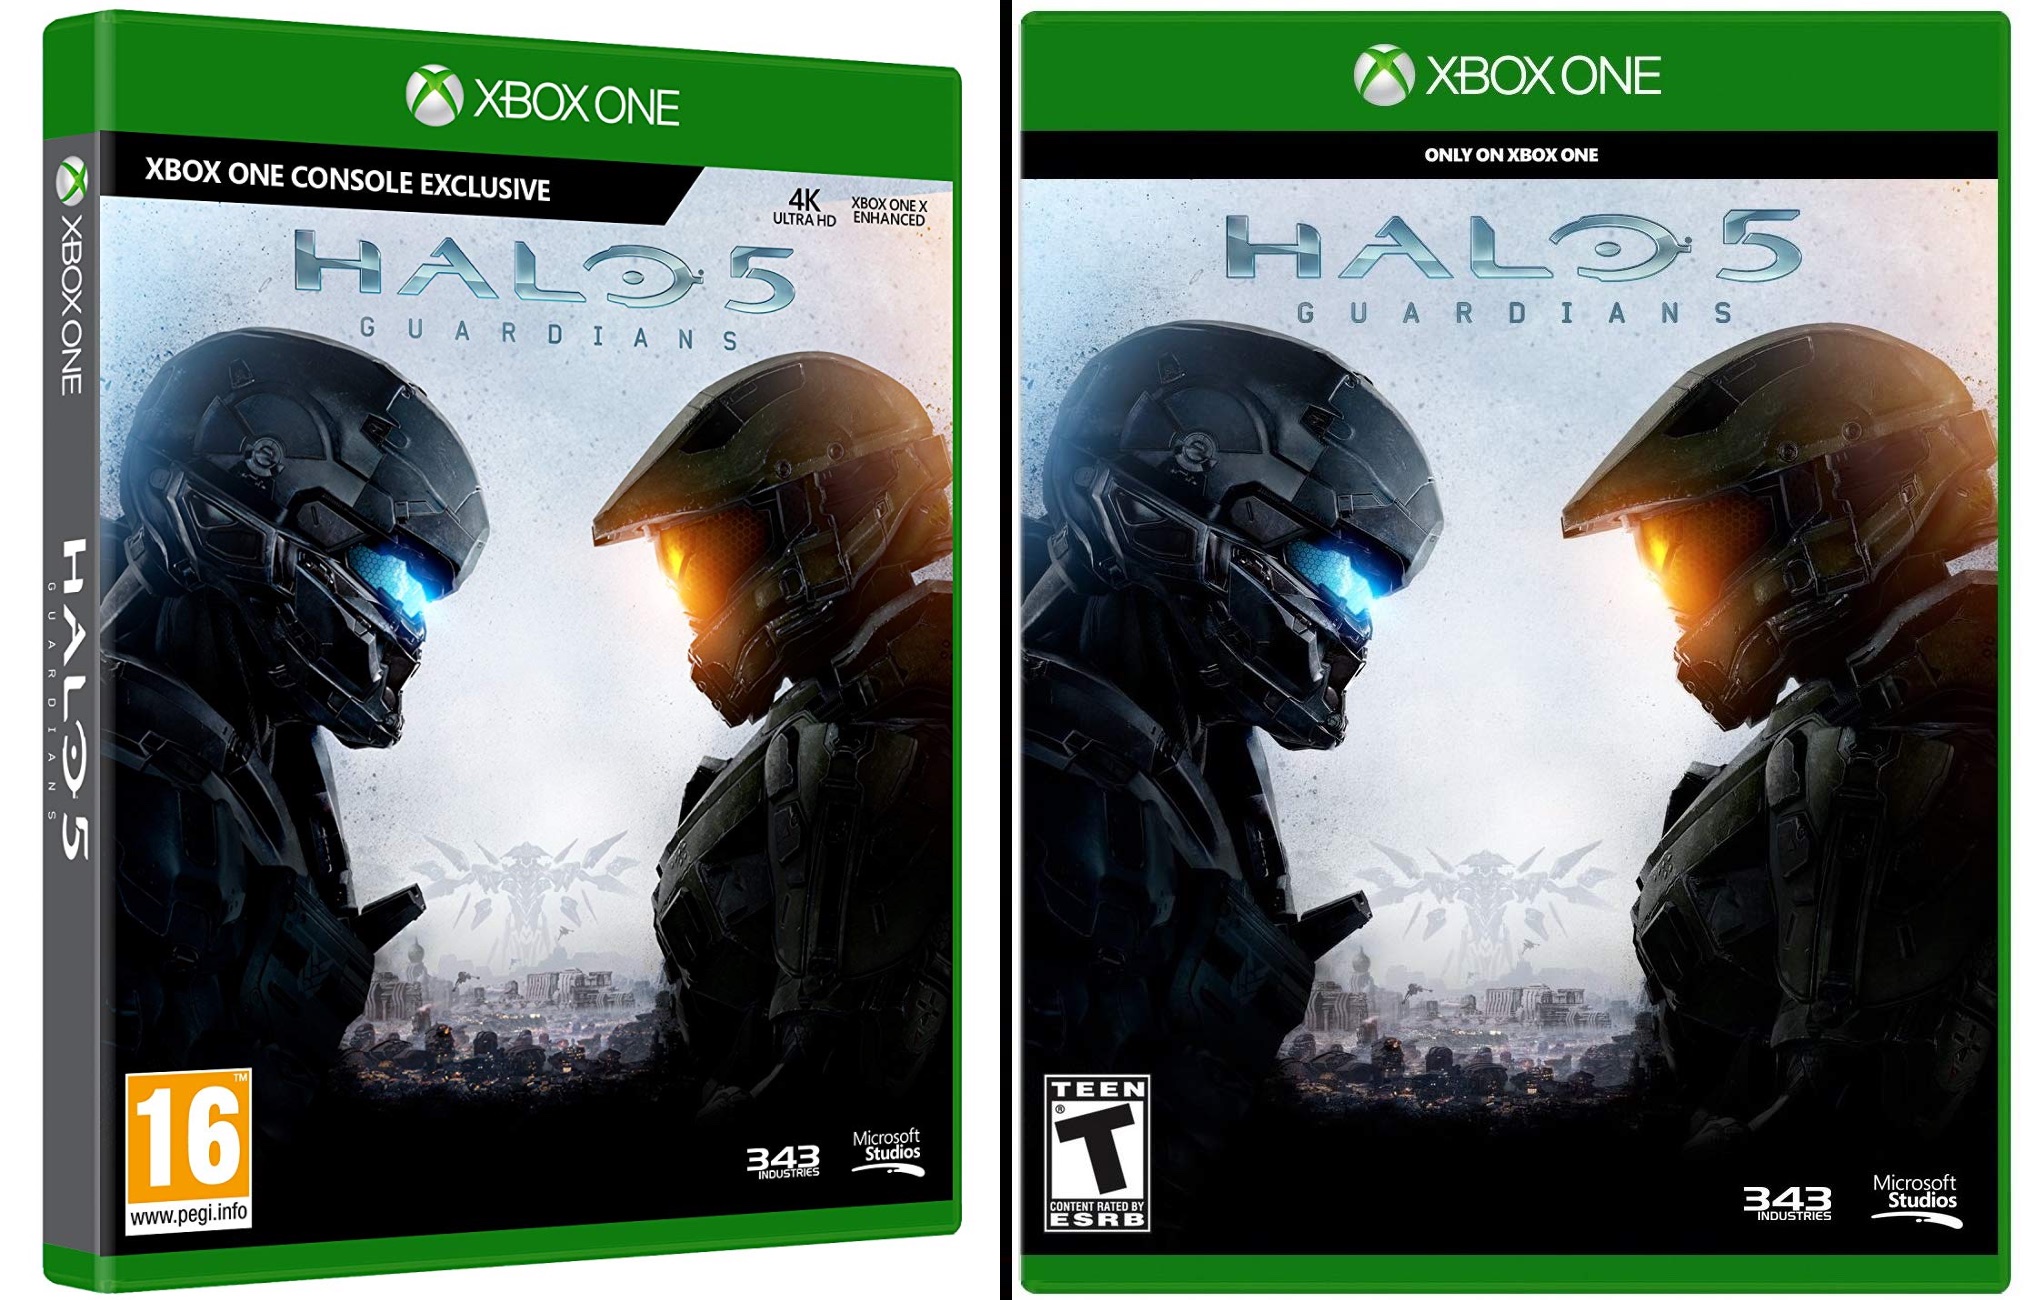 oplichterij Diversiteit zak Amazon may have just teased the first retail Halo FPS on PC in 11 years  [Updated] | Ars Technica